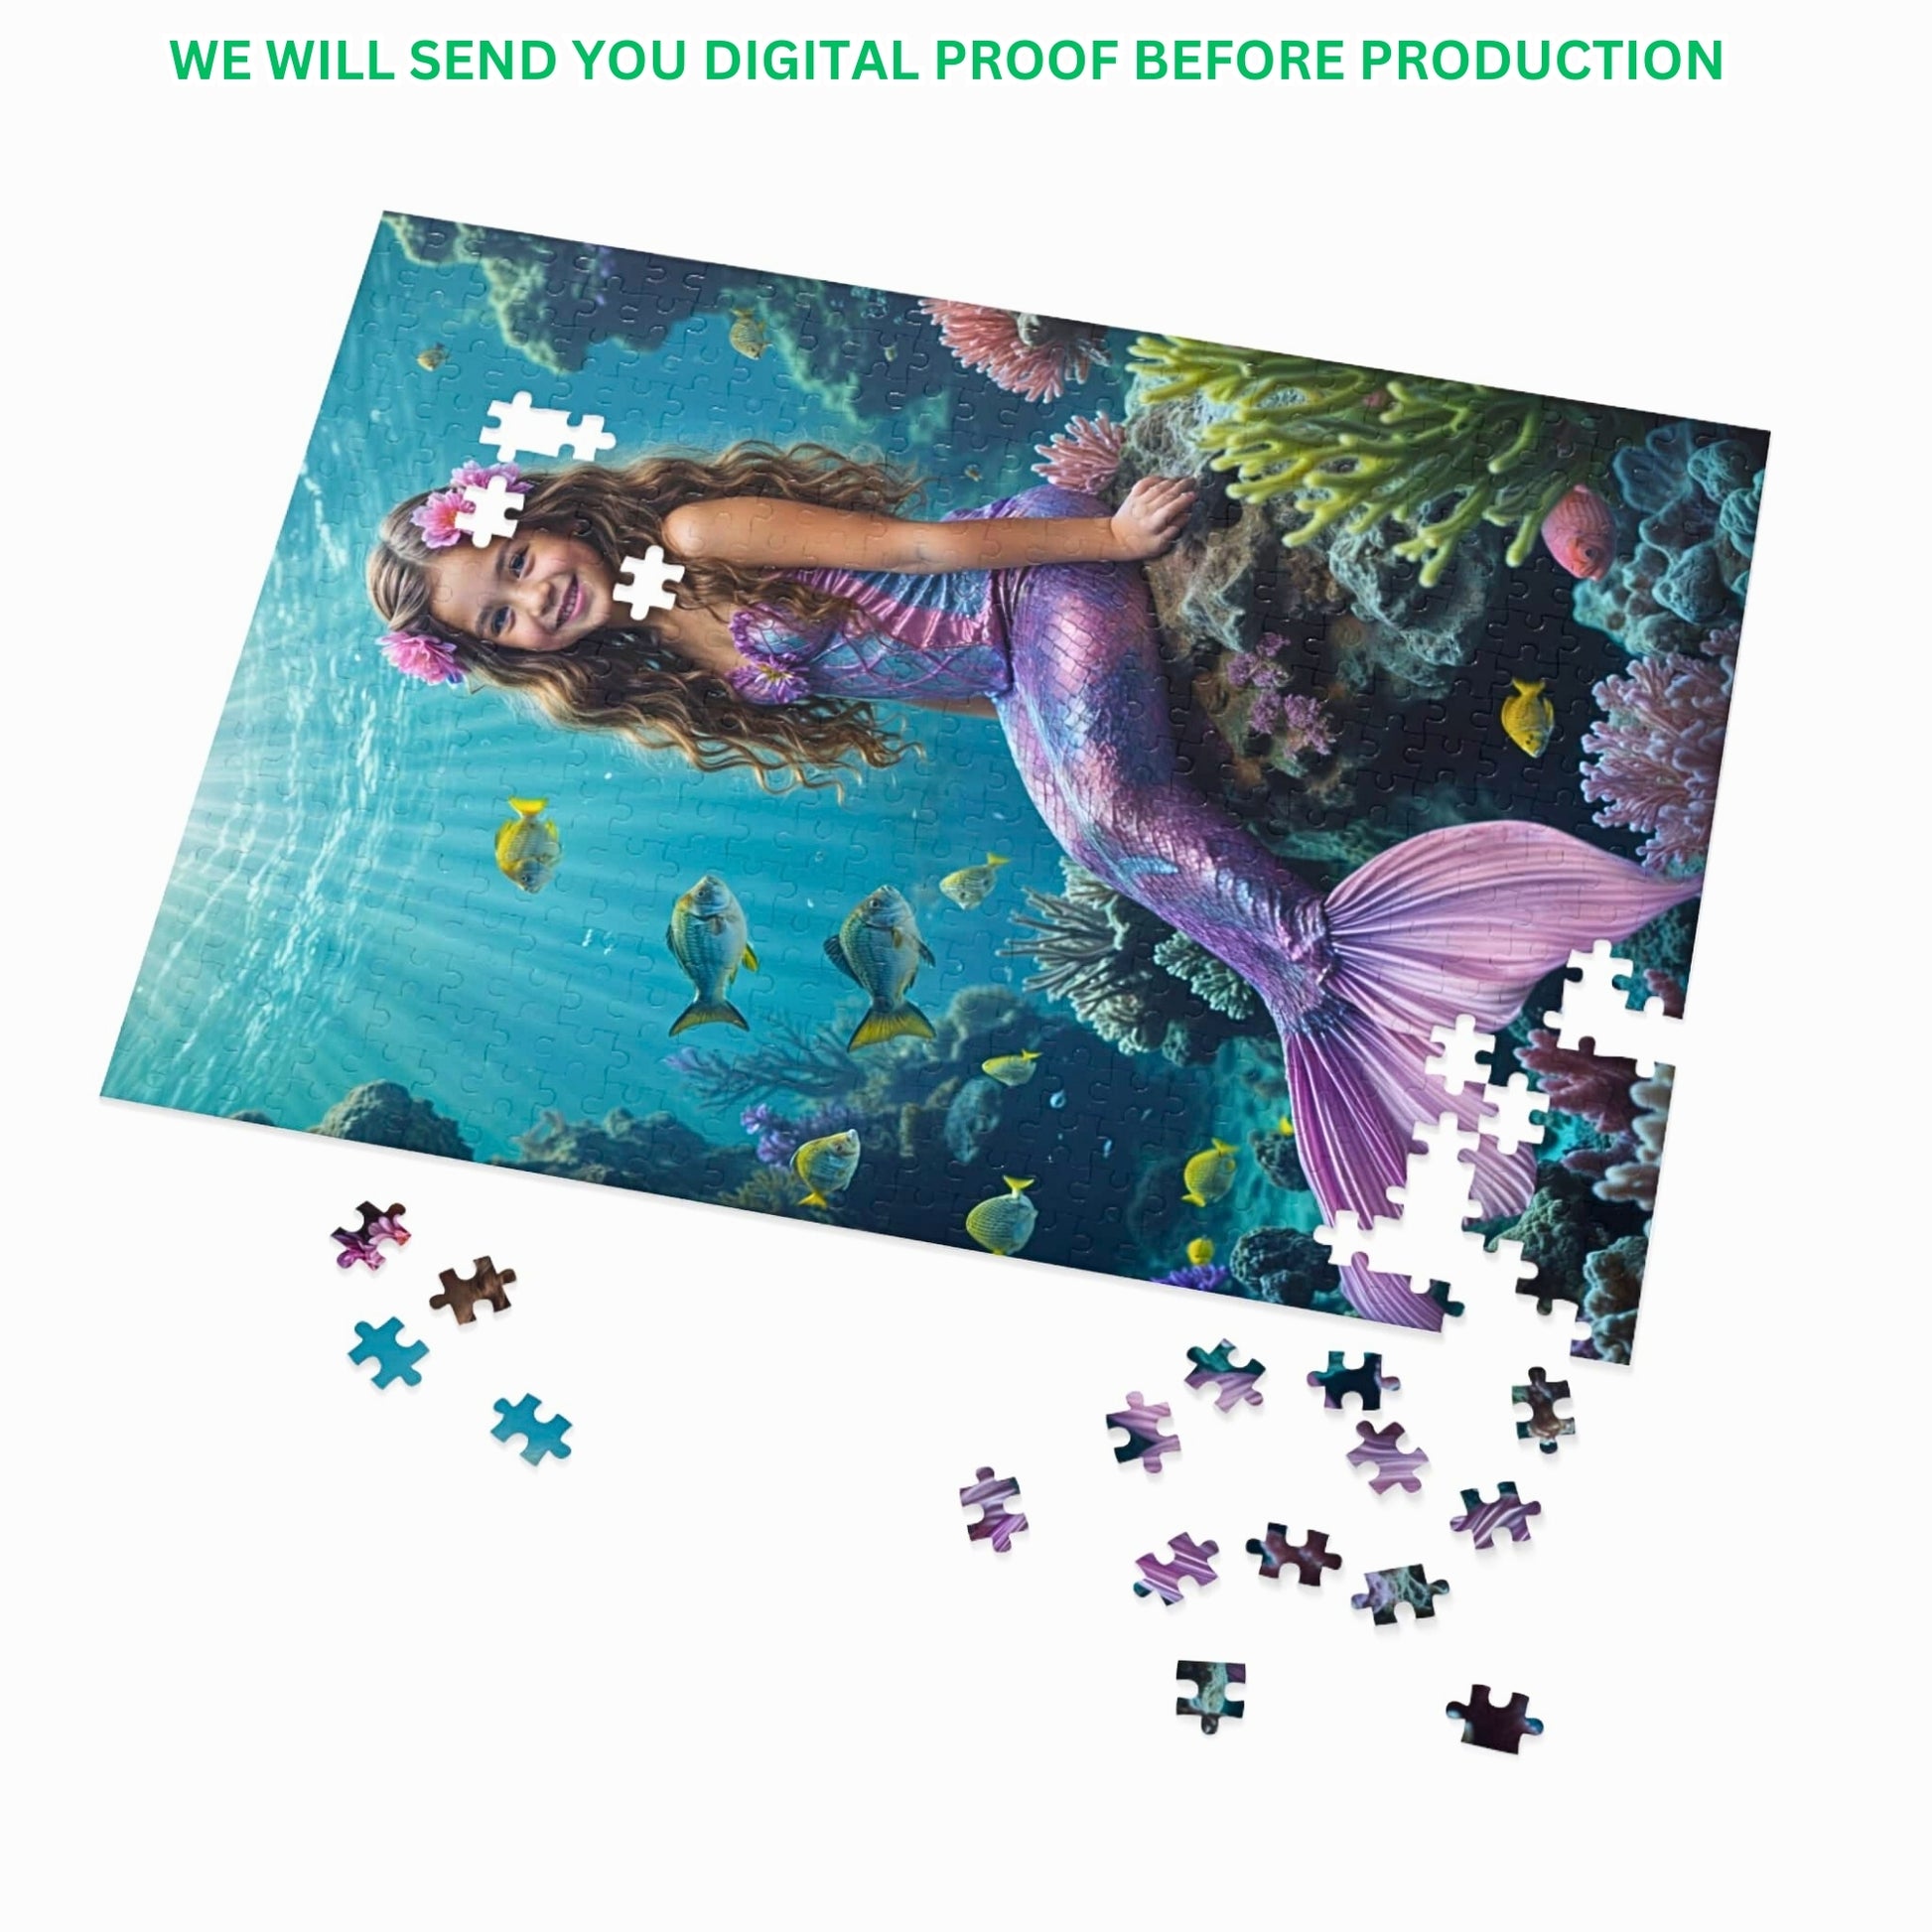 Custom Mermaid Puzzle from Photo. Personalized Girl Little Mermaid puzzle. Custom Princess Portrait Mermaid Gifts. Princess Birthday Gift add puzzle. 250 to 1000PC. Unique Mermaid Puzzle. Custom Gift for Girls. Mermaid Birthday Puzzle. Personalized Princess Gift. Custom Mermaid Art Puzzle. Princess Photo Gift.